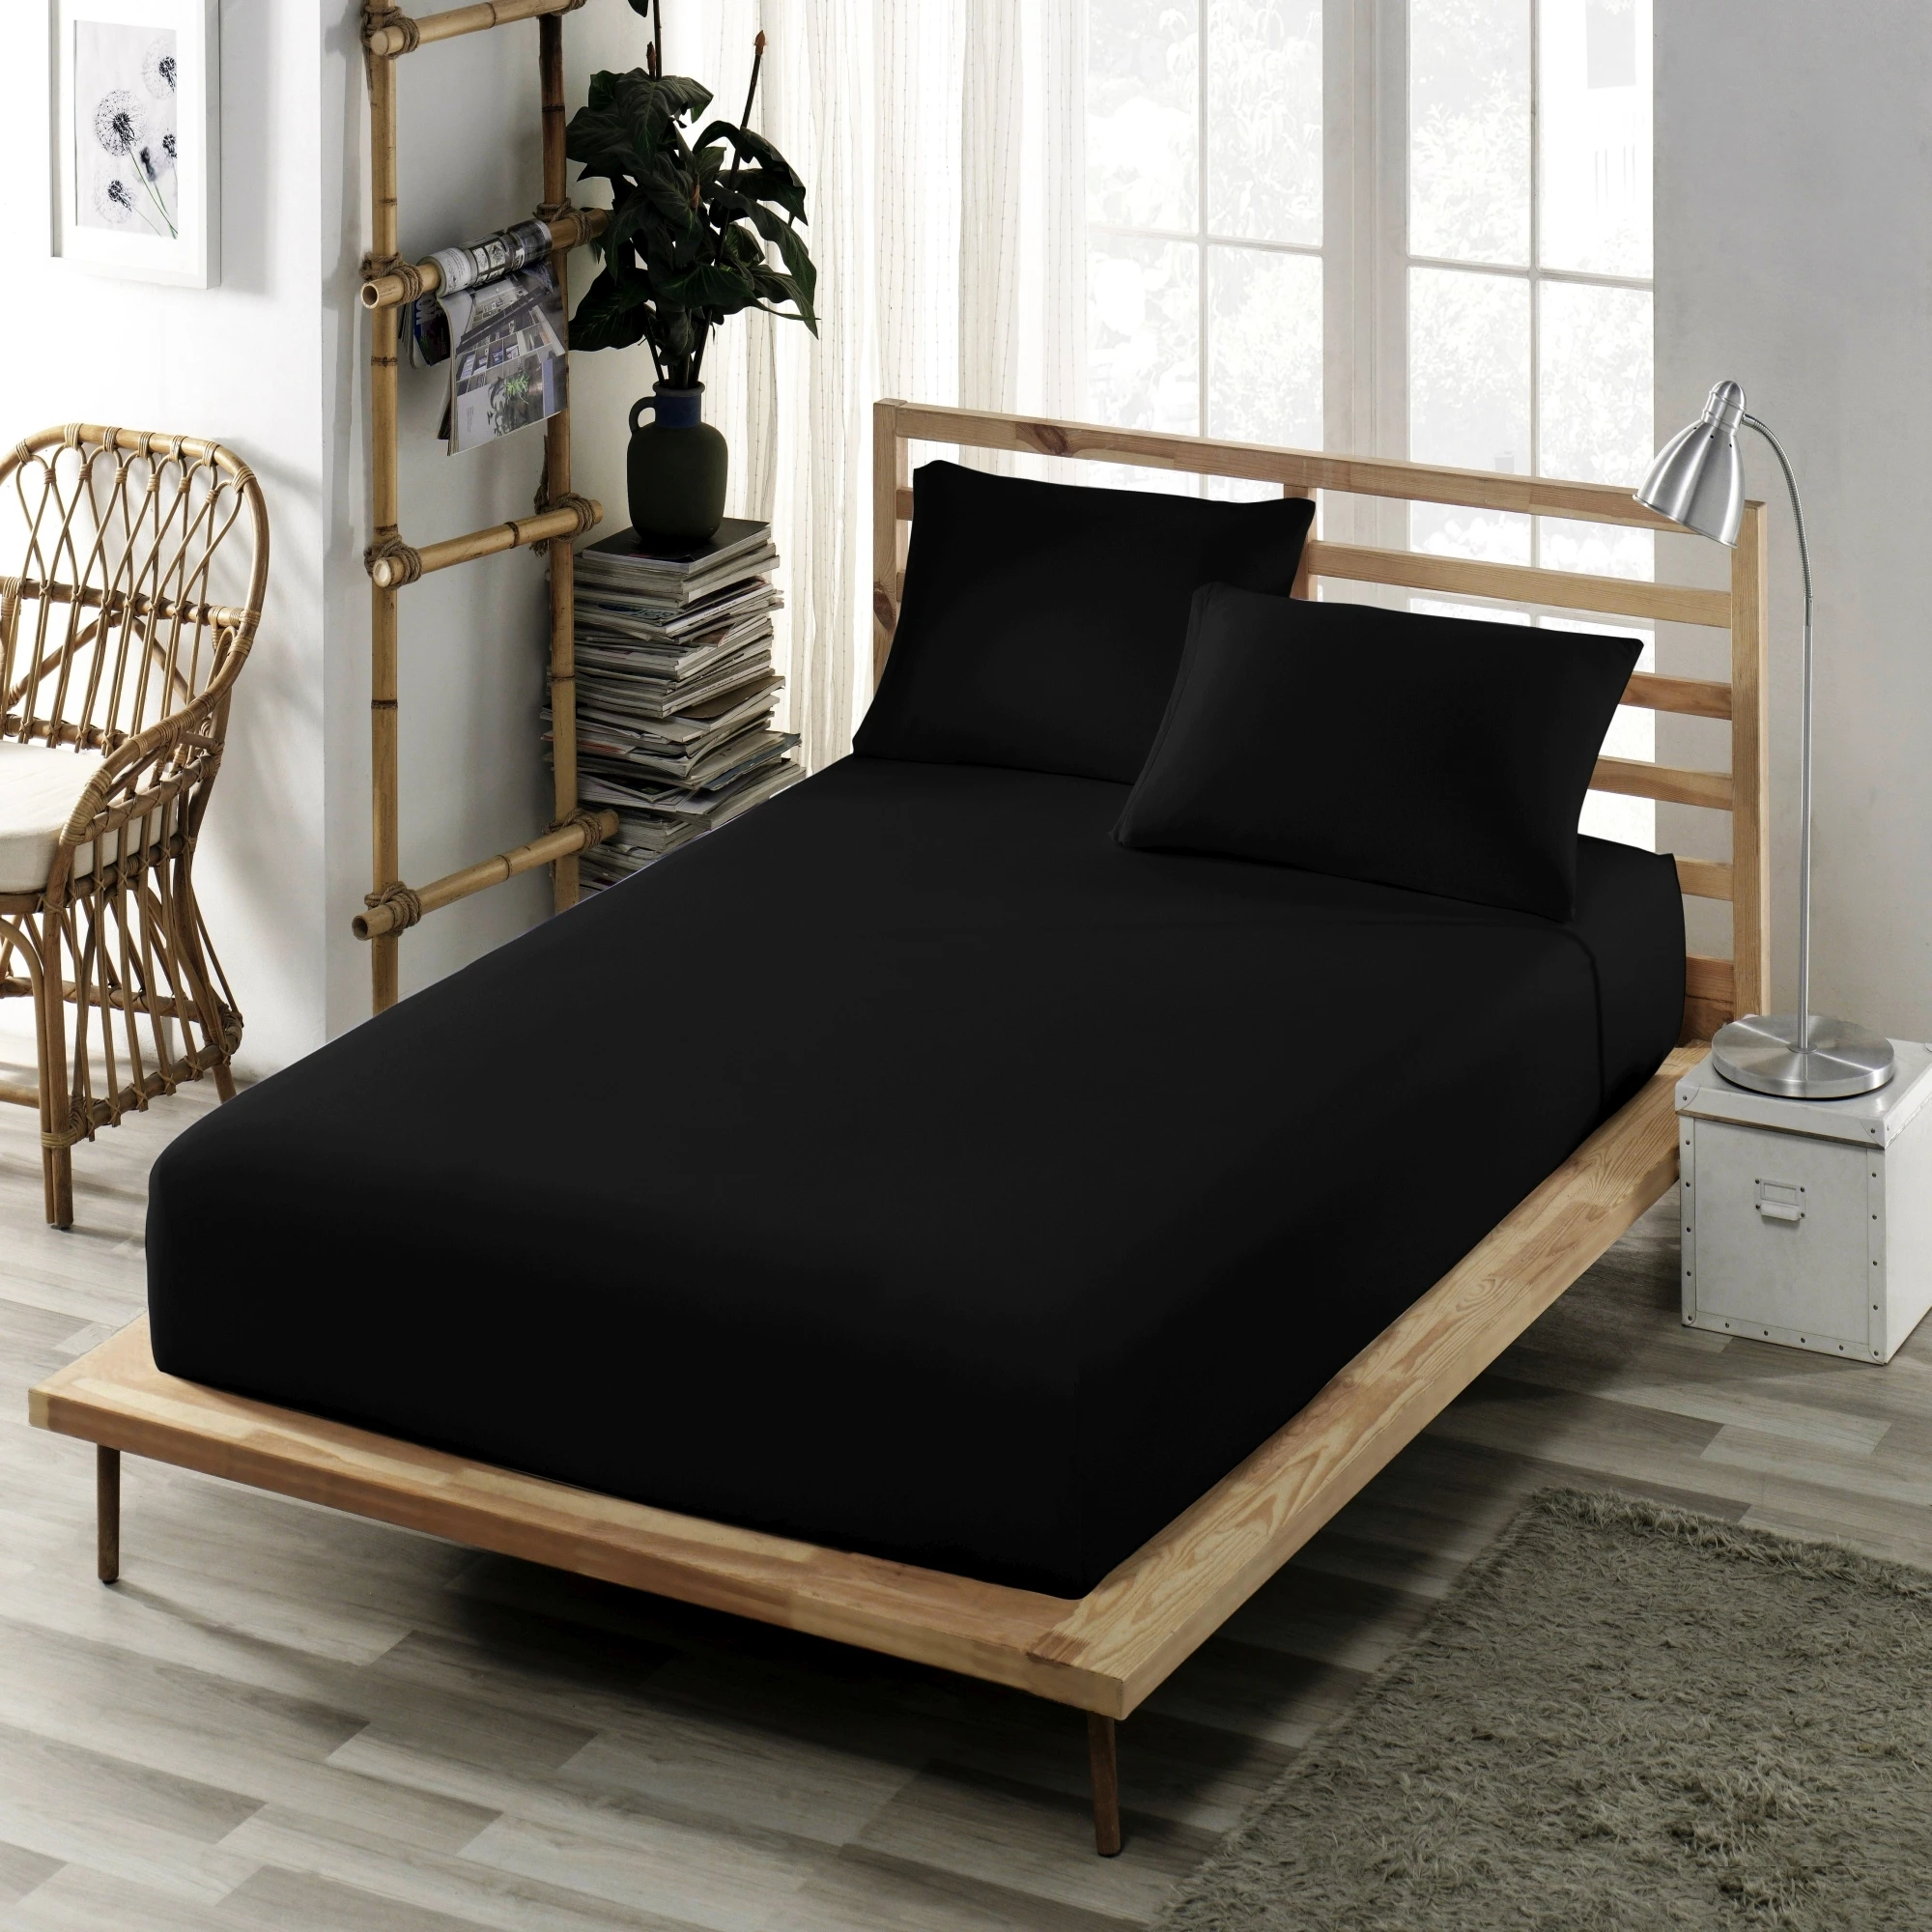 

Fitted Bed Sheet-Linen Cotton Fabric (Ranforce)-All Sizes-King Size-Double-Queen-Twin-Mattress Cover Soft-Black